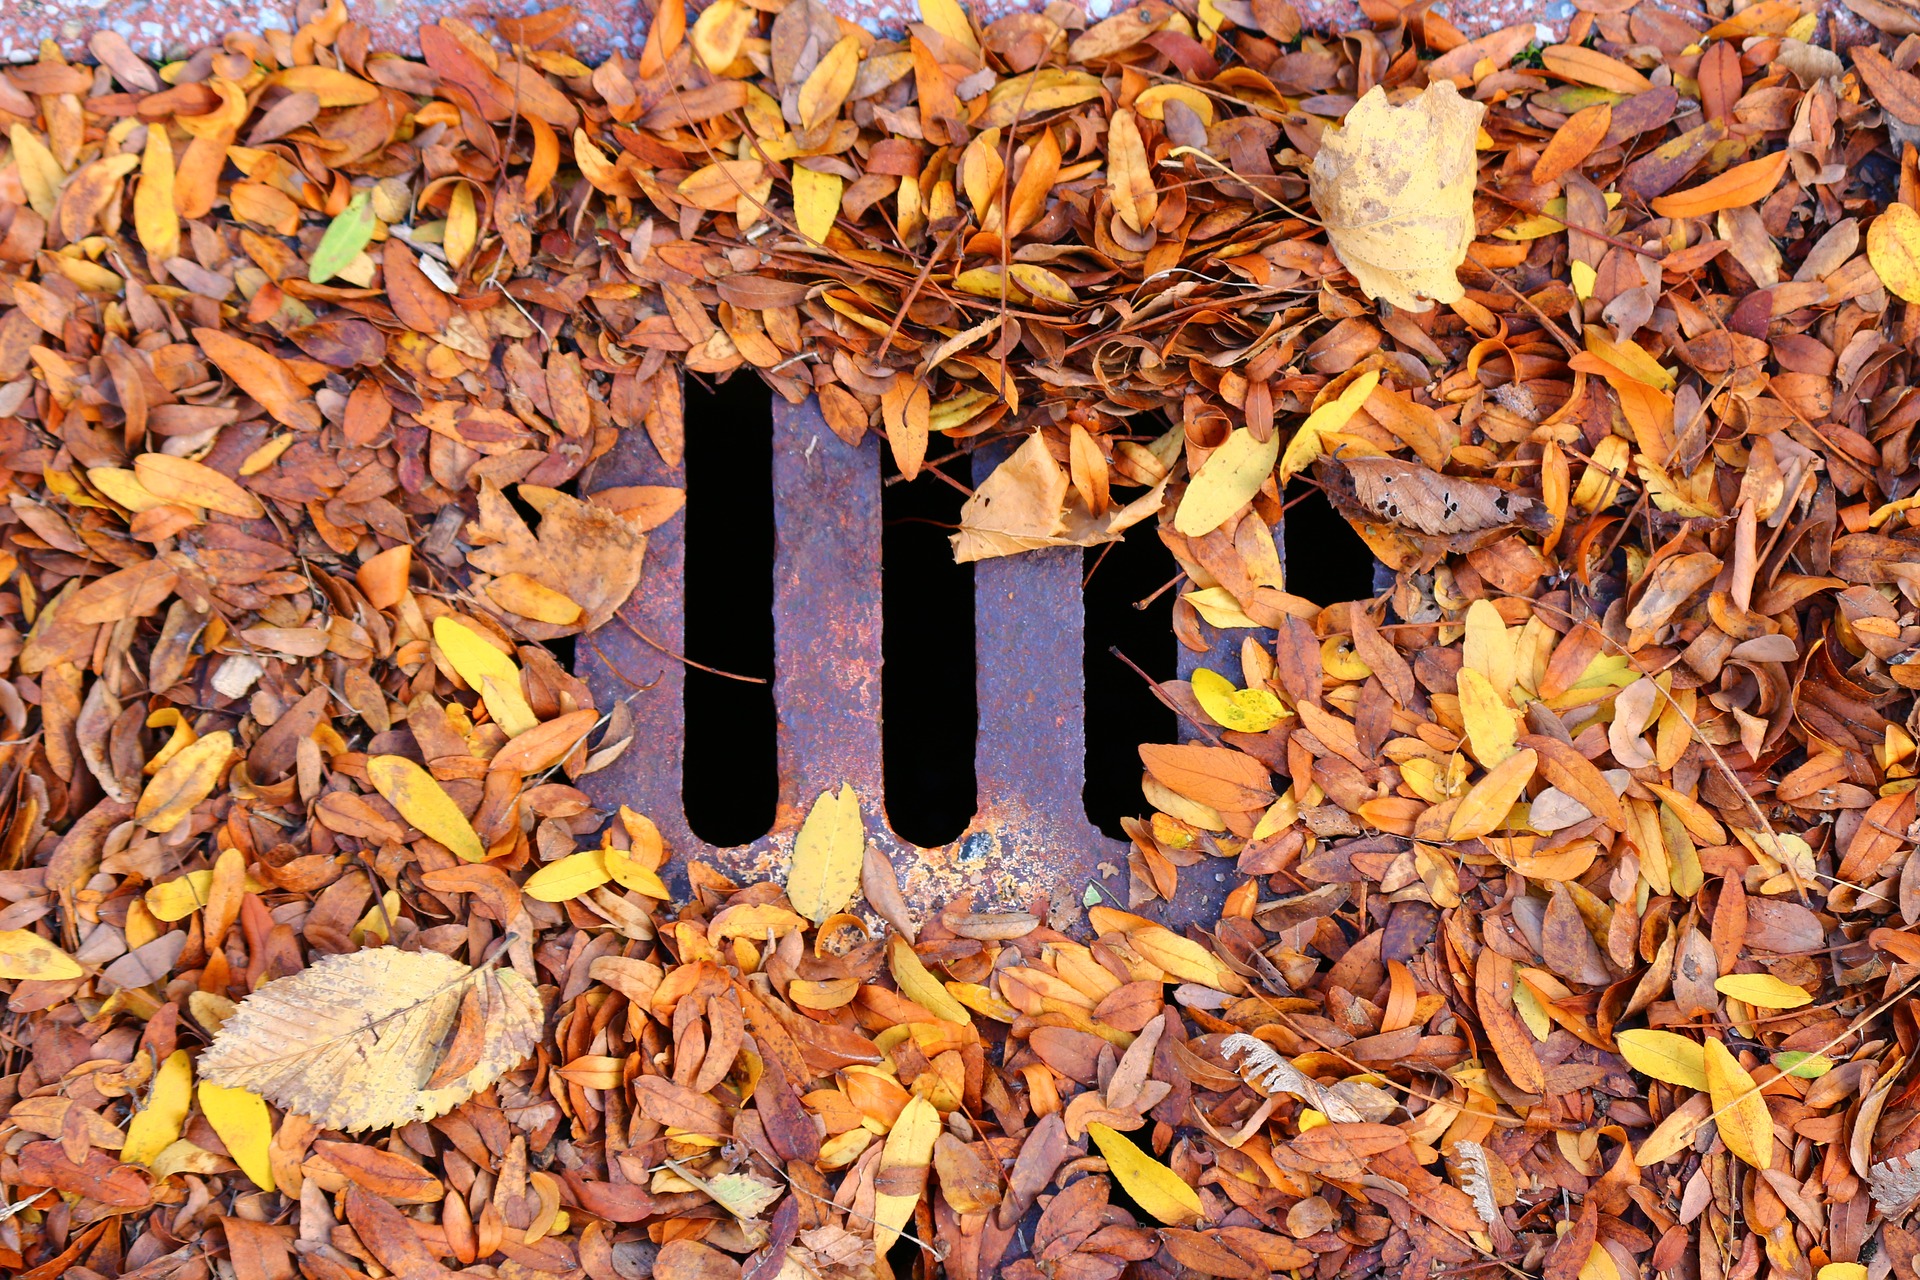 a drain covered in leaves that needs unblocking before winter